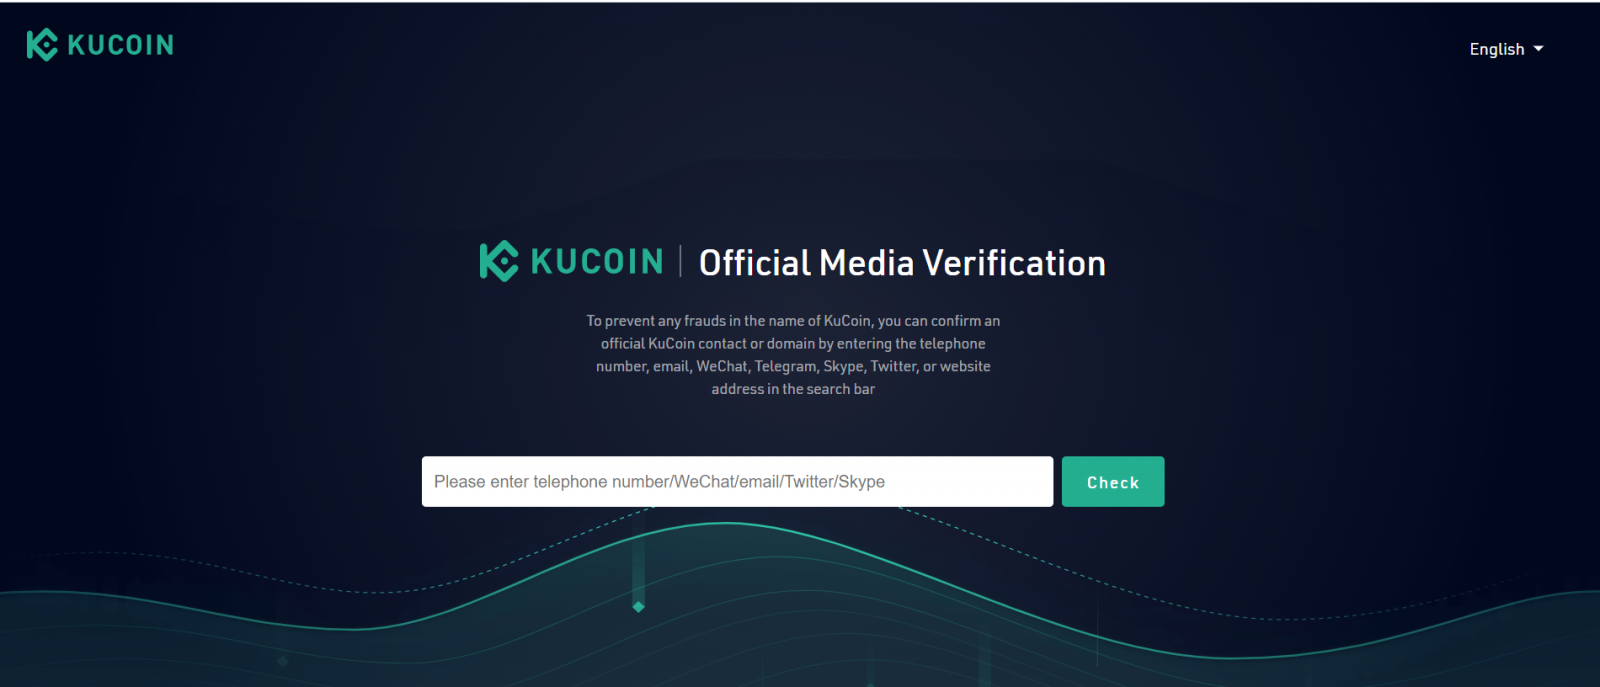 How to Contact KuCoin Support